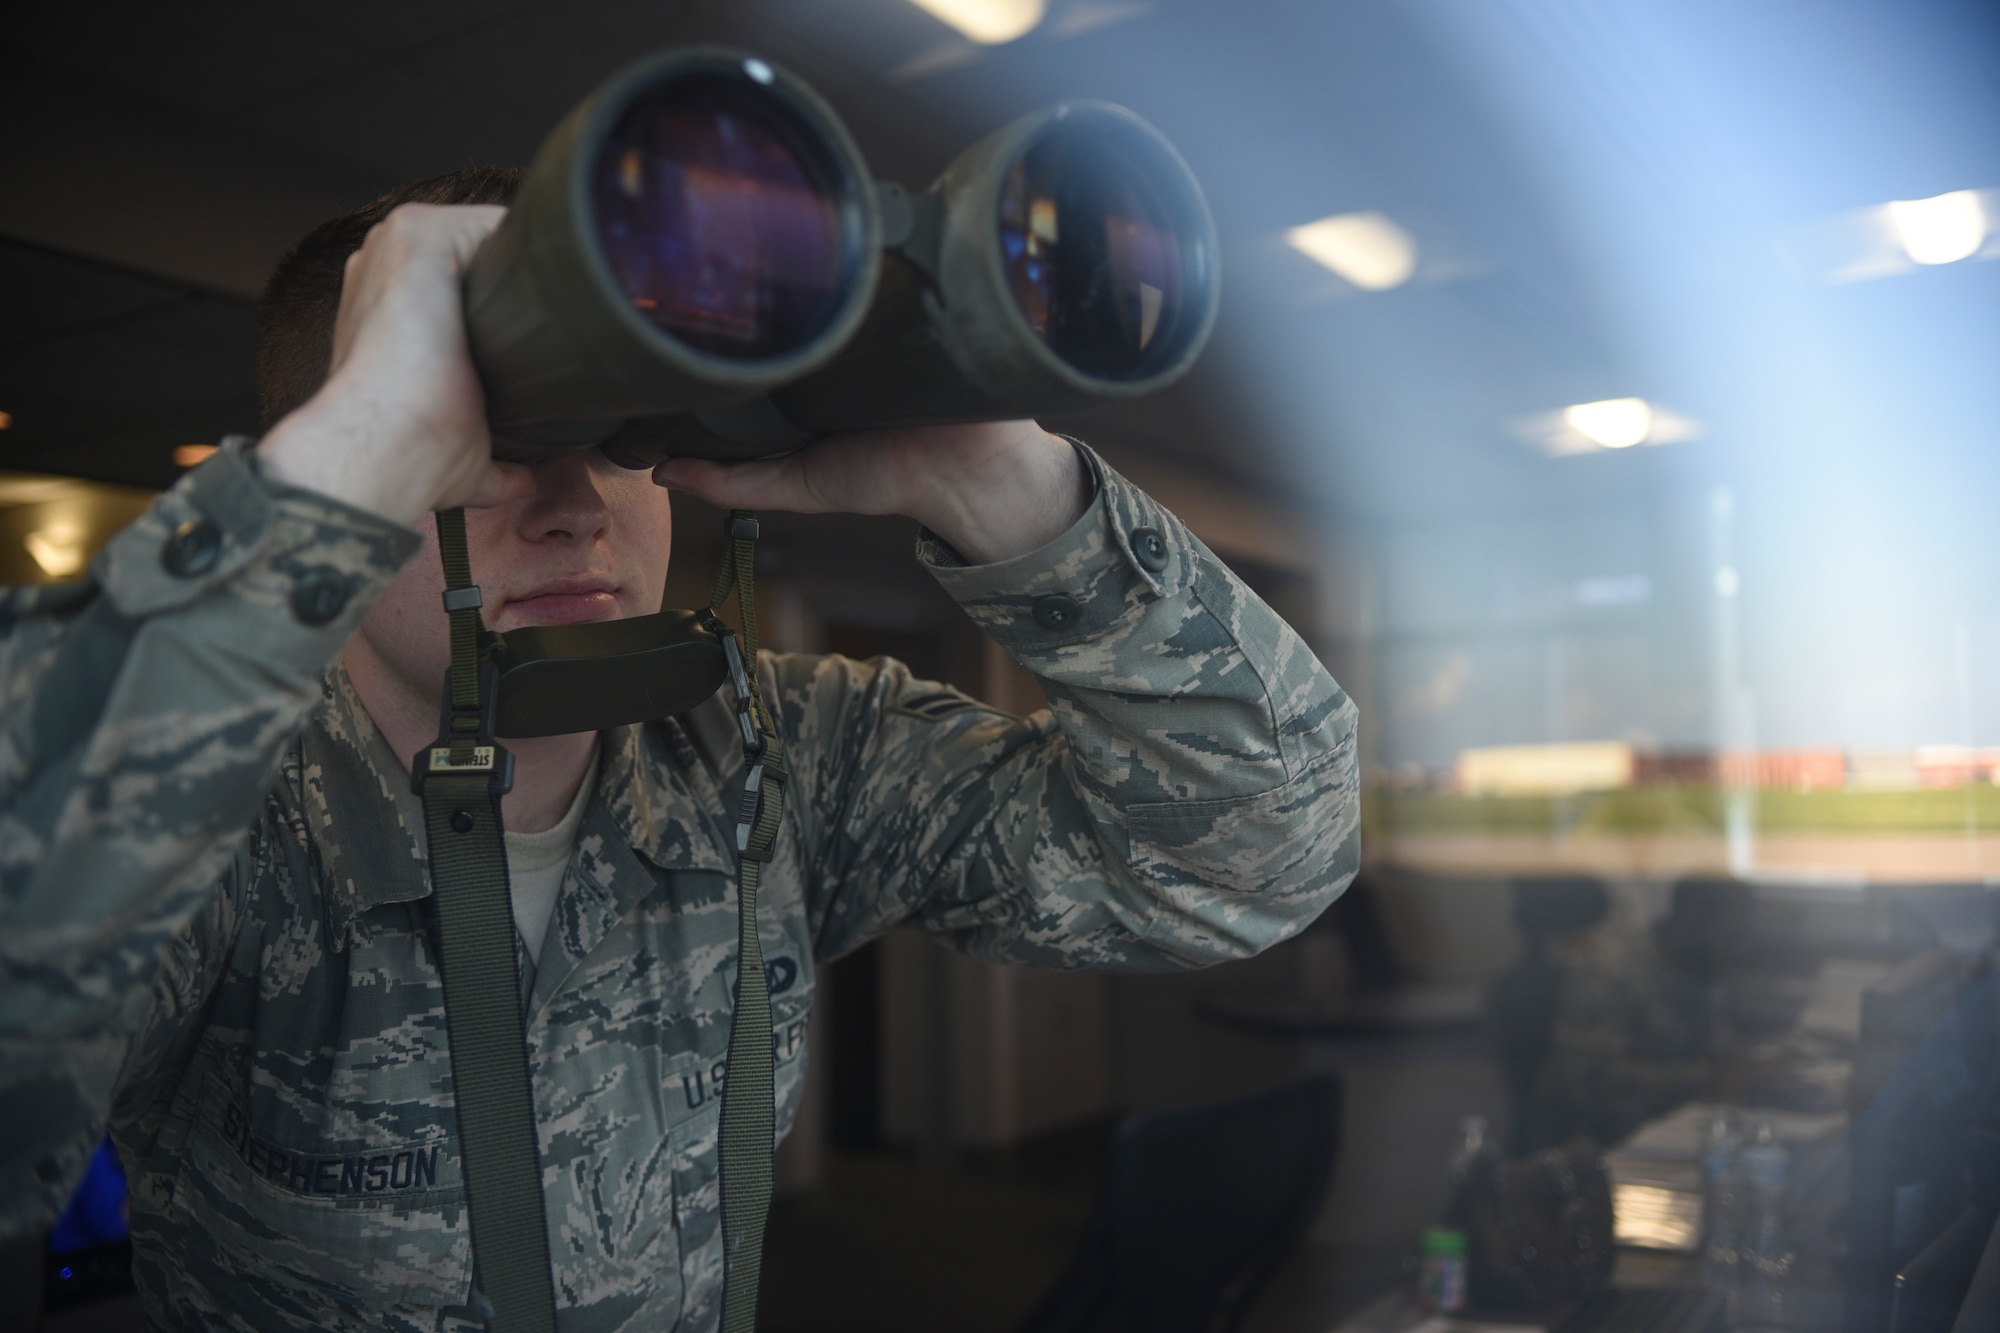 Airman 1st Class Casey Stephenson, 72nd Operations Support Squadron airfield management, uses a pair of binoculars to track airfield operations while part of the large hangars and runway he is watching is reflected in the glass May 23, 2018, Tinker Air Force Base, Oklahoma.